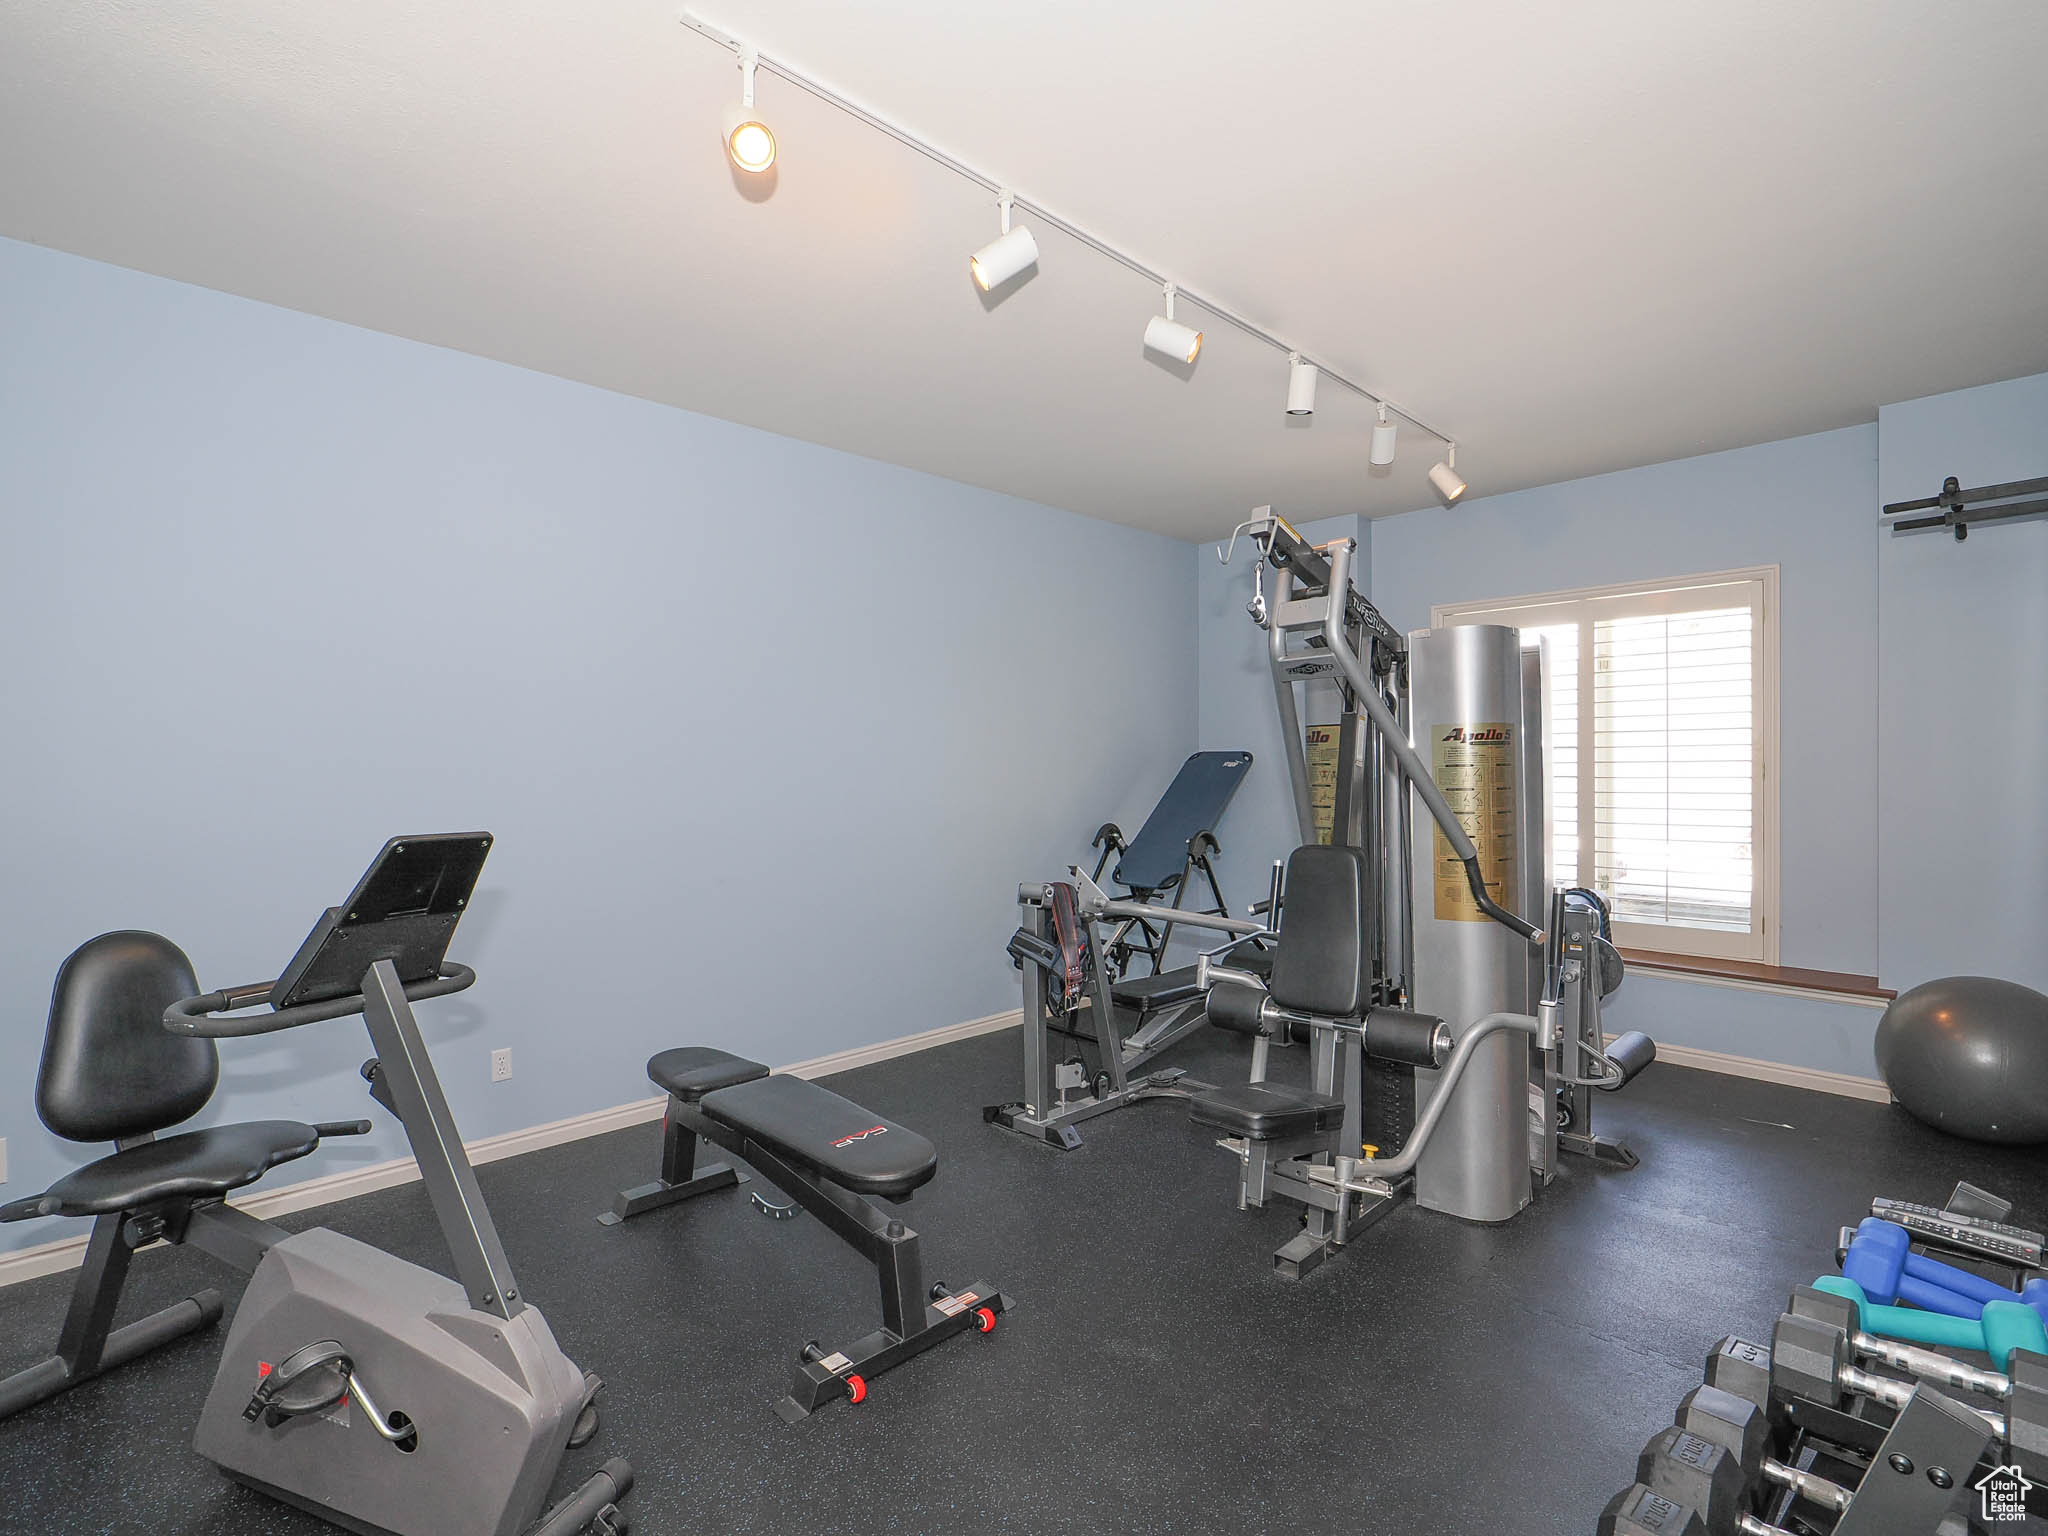 Lower-level workout room with rubber floor and Jack-and Jill bathroom shared with Basement Bathroom .